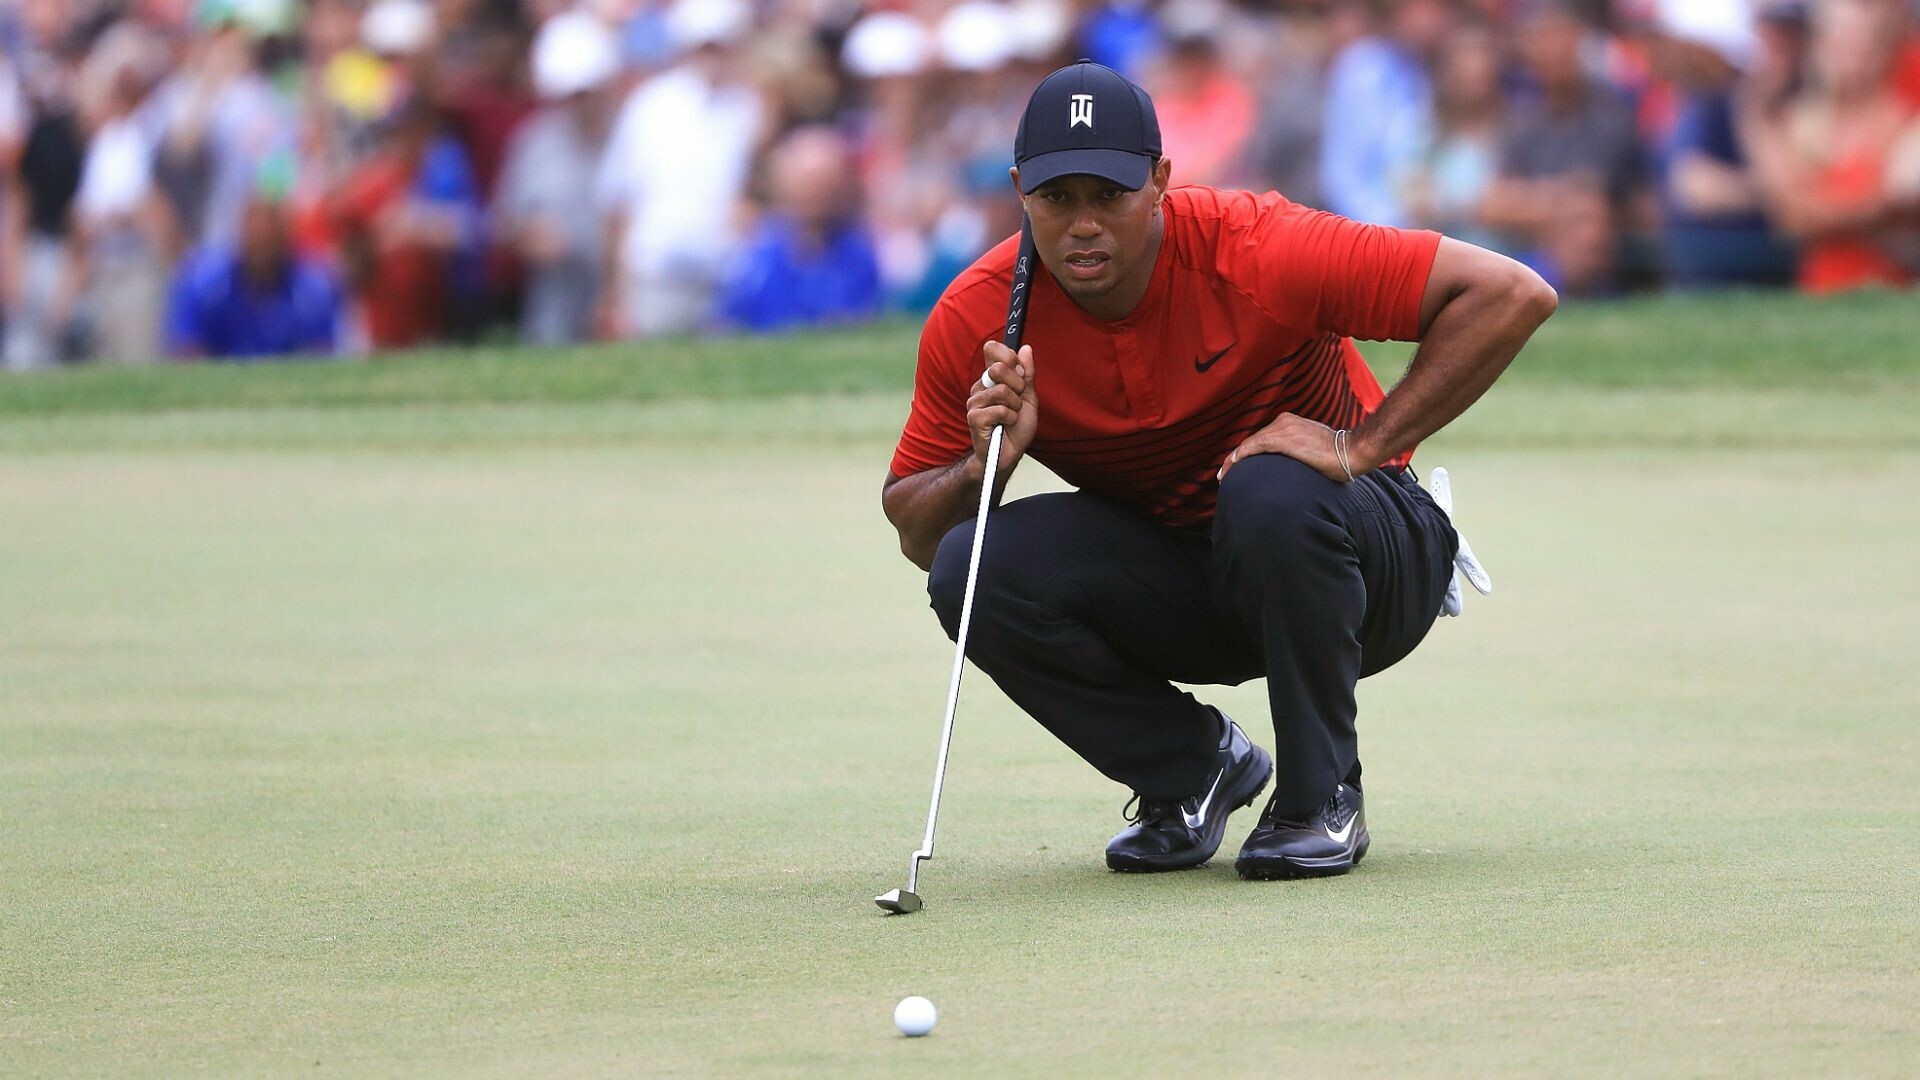 Tiger Woods: He won six consecutive events on the PGA Tour in 2000, Golf player. 1920x1080 Full HD Wallpaper.